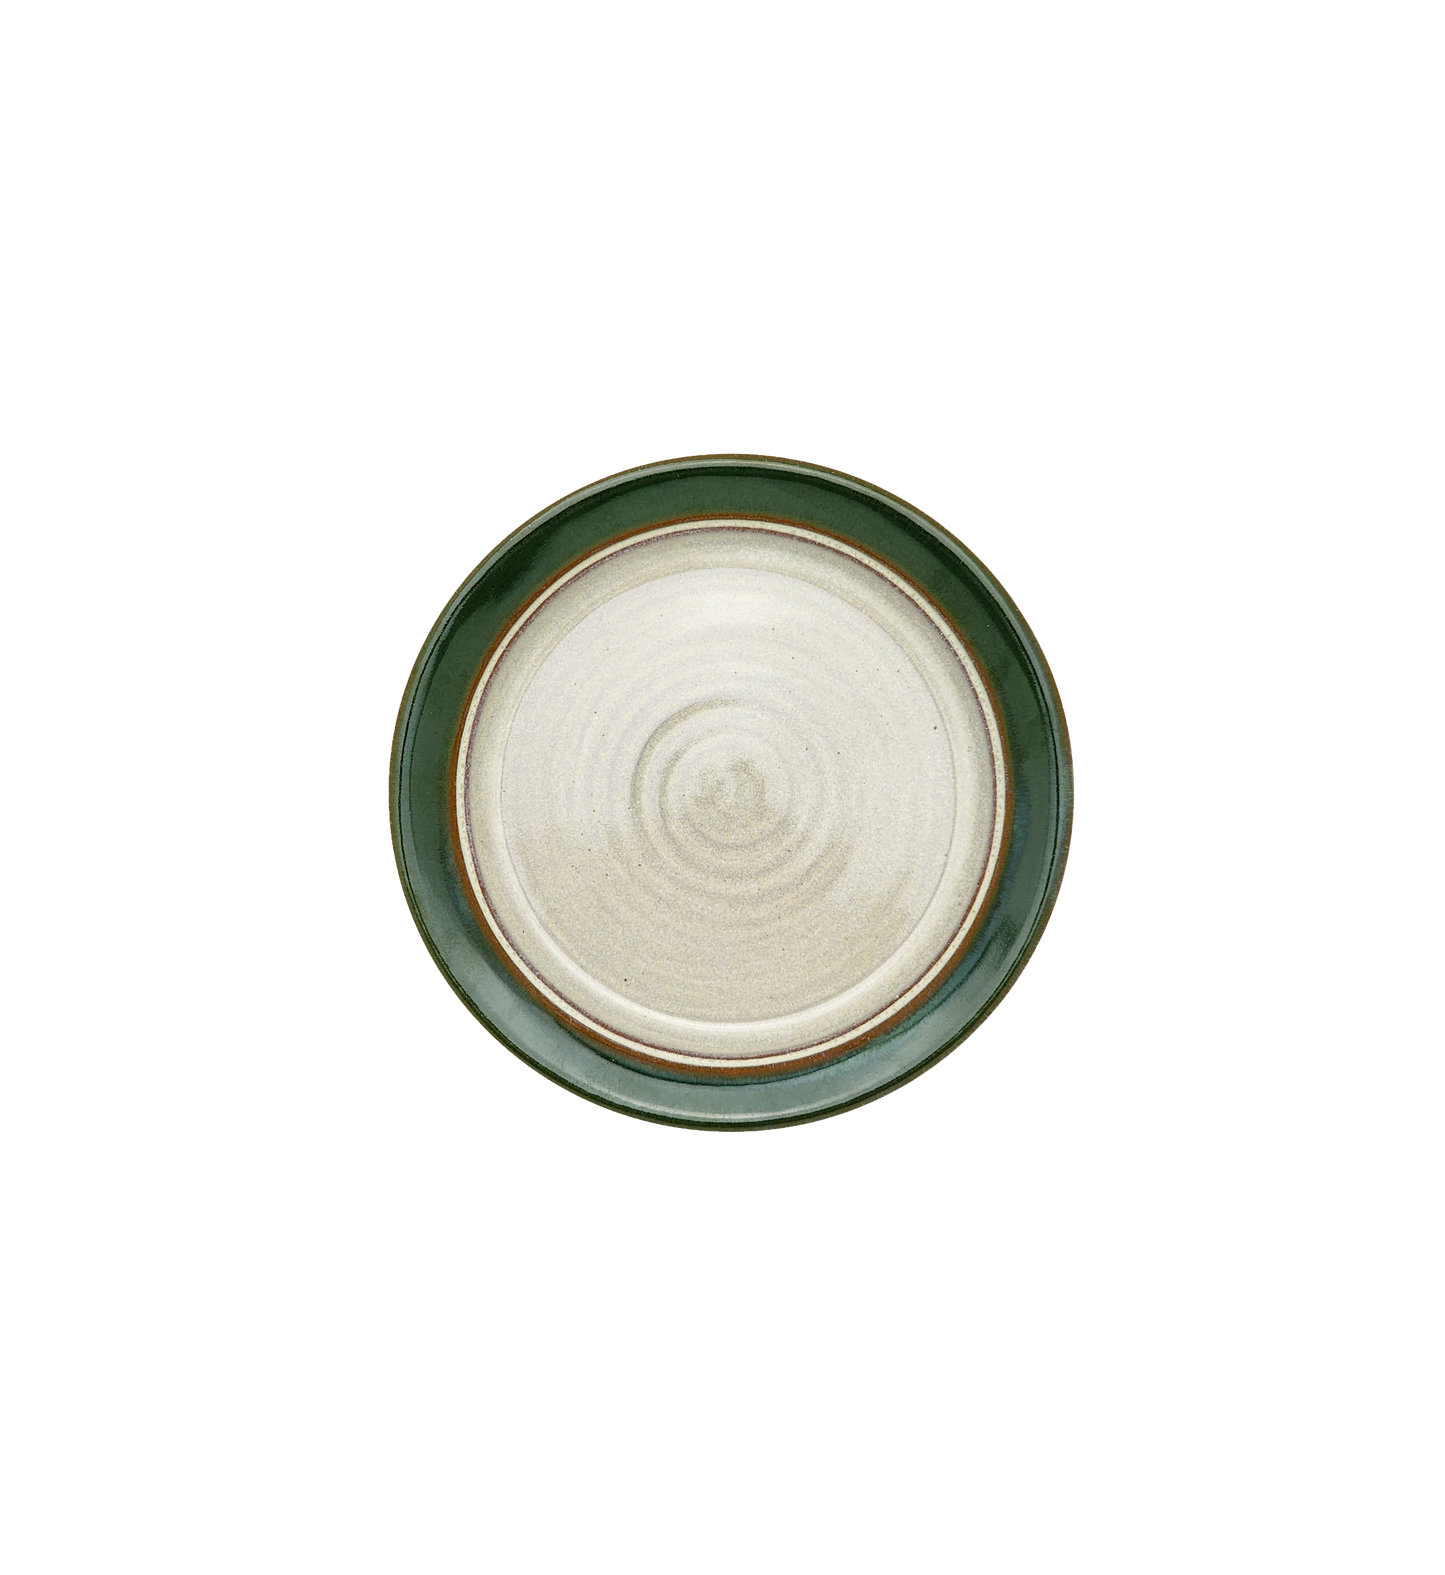 Image Description for Dessert Plate (6.5") in Dark Green: A dessert plate from Clinton Pottery's Handmade Dinnerware Collection, showcasing a rich and deep "Dark Green" glaze. The 6.5-inch plate exhibits a glossy finish with hues reminiscent of lush vegetation. Its petite size is ideal for serving delightful desserts or small treats with a touch of natural charm.